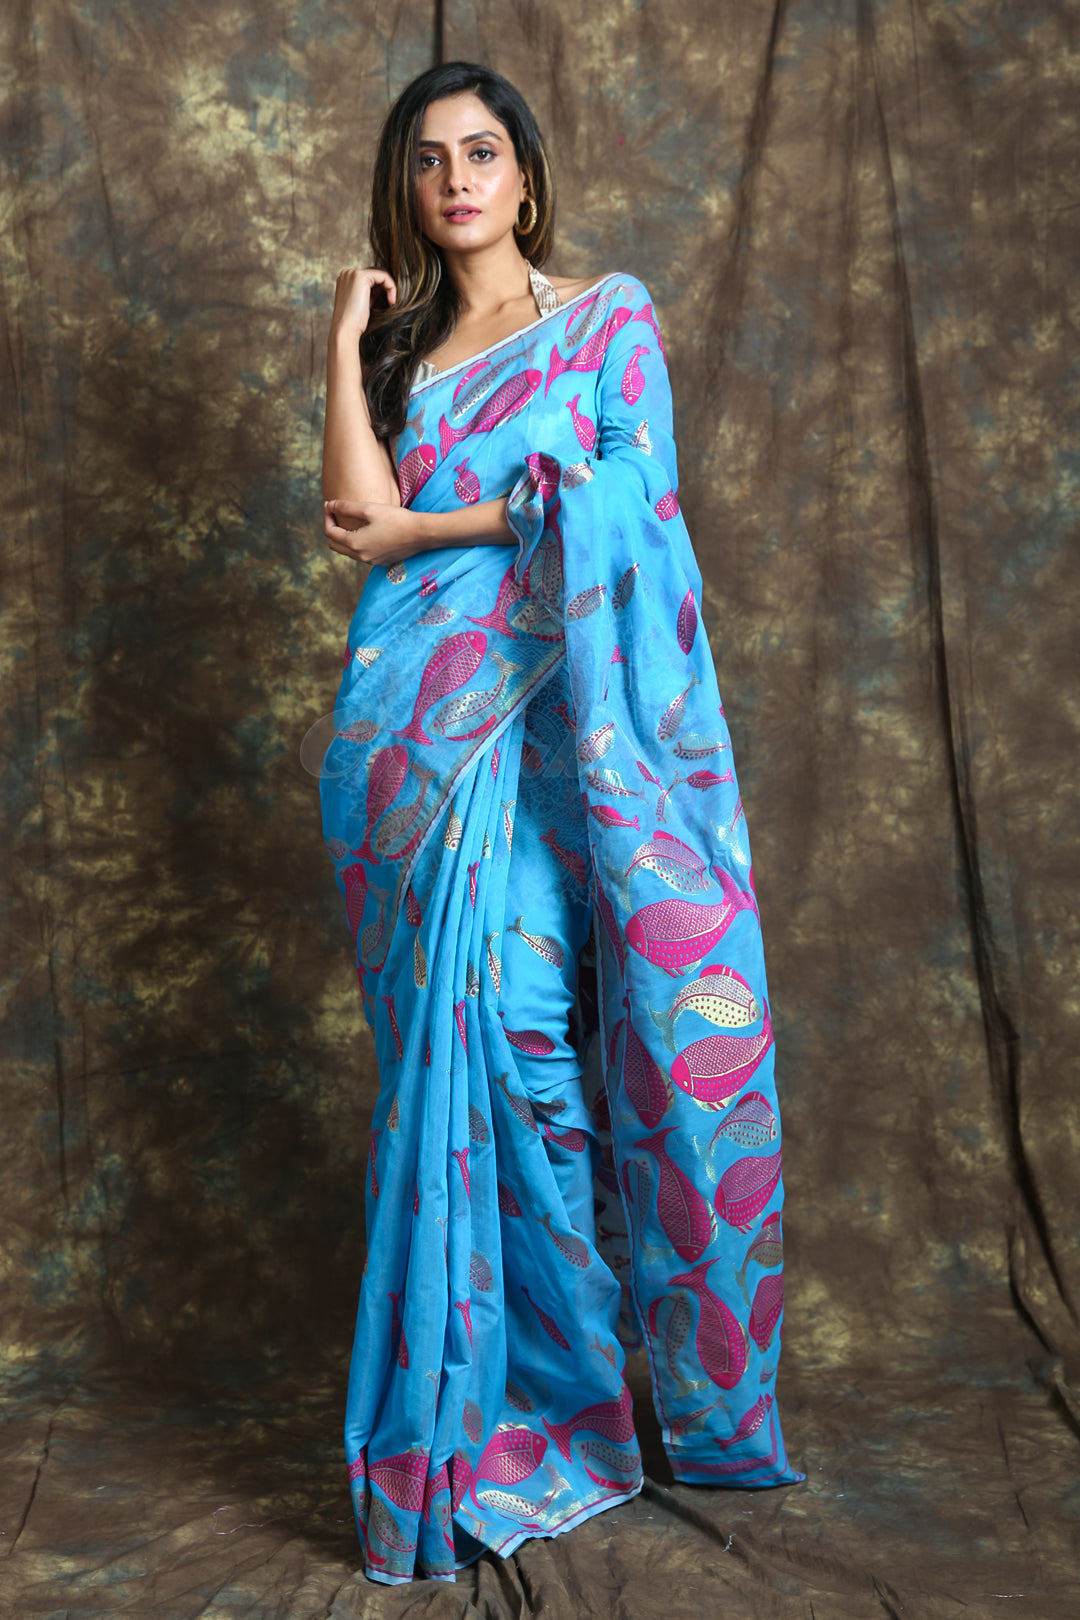 The Azure Blue Color Saree Is Crafted With Pink & Copper Zari Fish Motive Work All Over The Body And Pallu - Charukriti.co.in